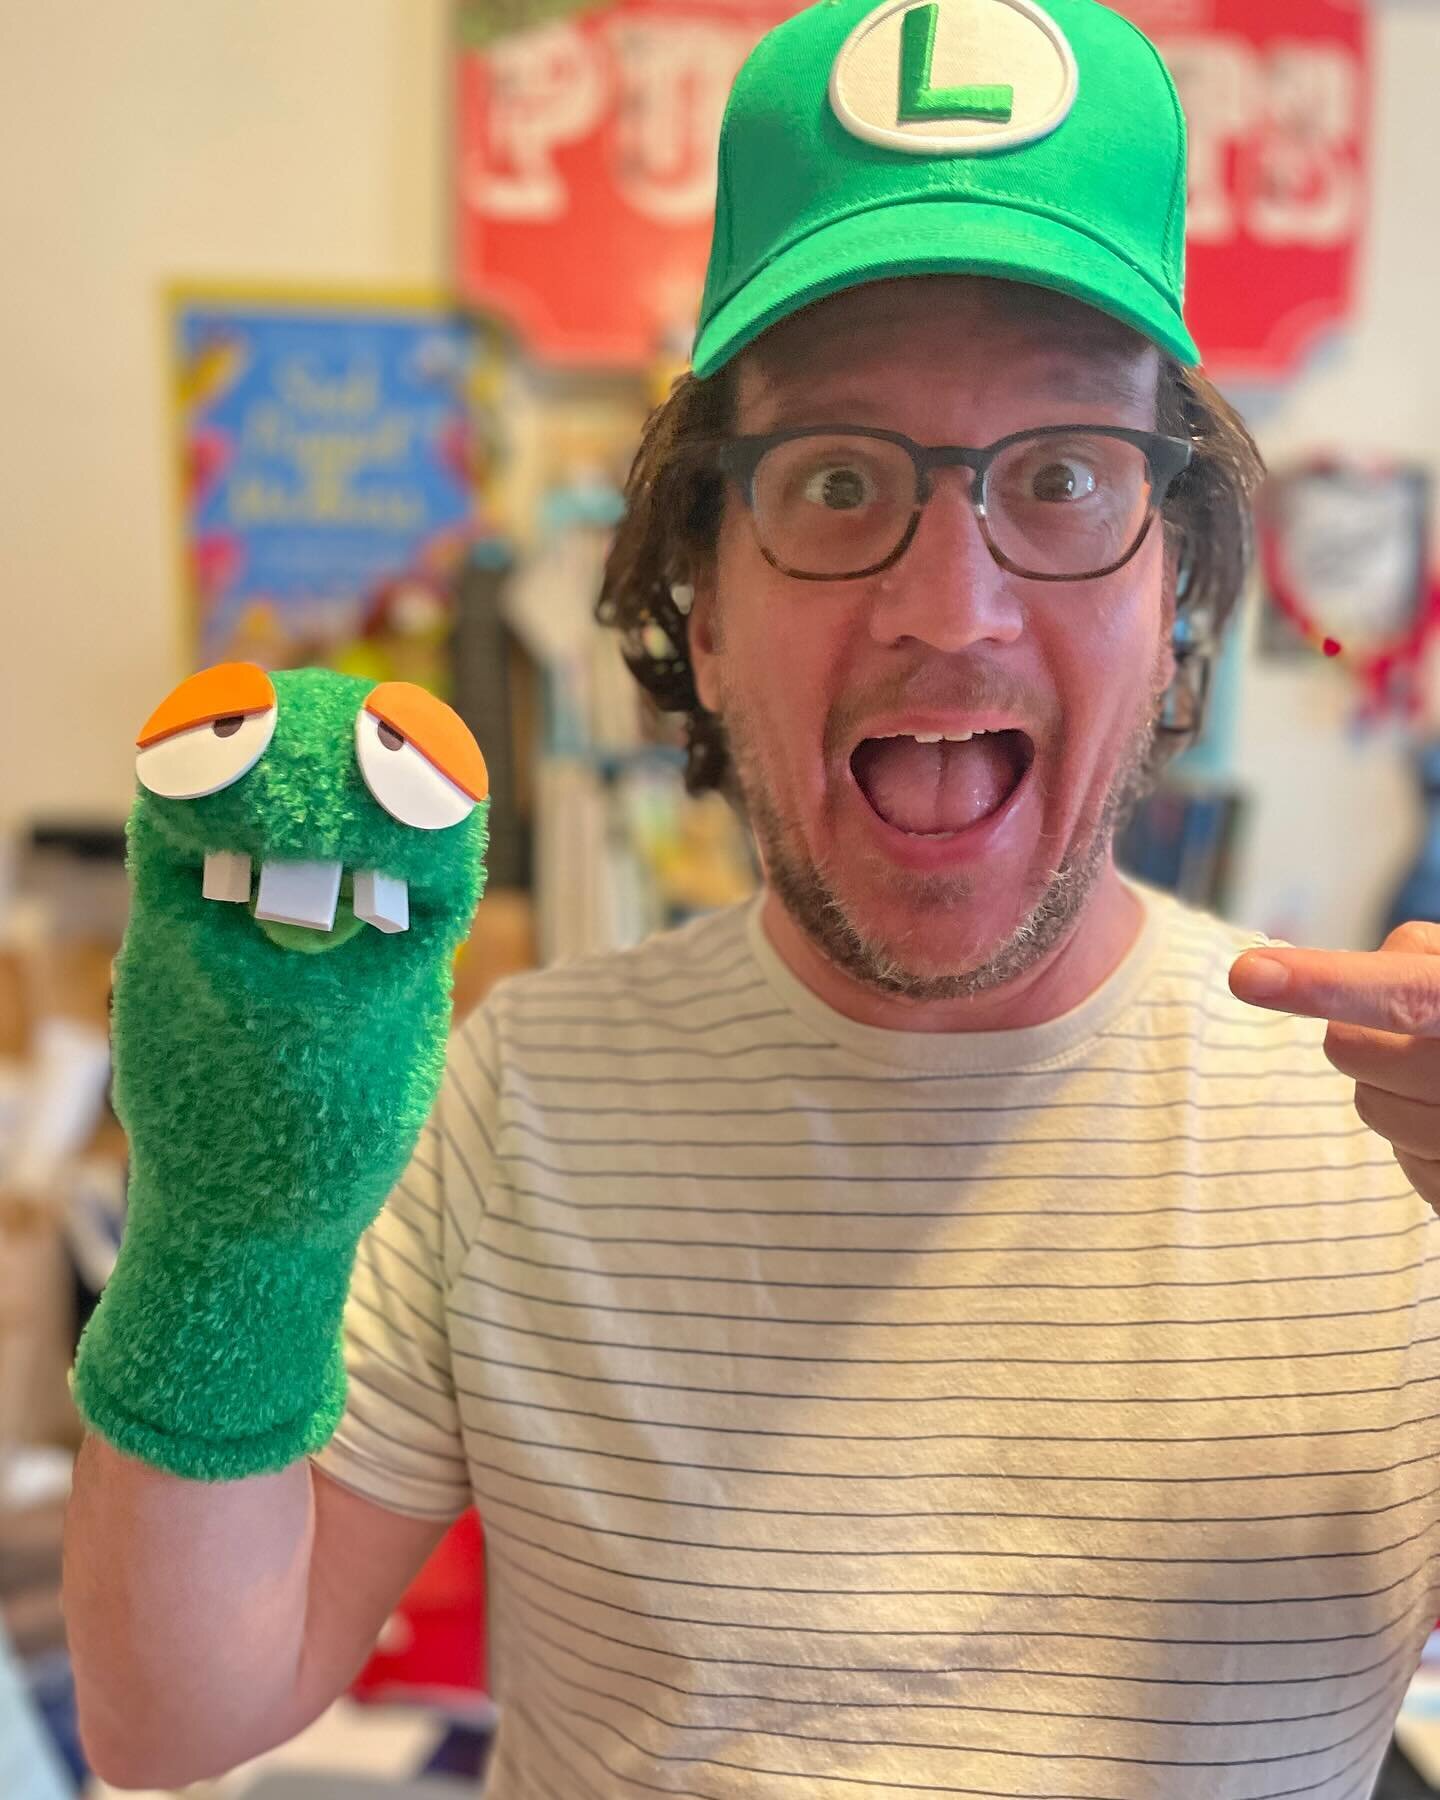 WORMIE WEEK&rsquo;s final friend is FERNY the Green WORMIE! FERNY, like all green WORMIES, talks to trees. FERNY specializes in small talk with sticks and shrubs.

You can get your very OWN FERNY (while supplies last) at Sock Puppet City! https://www